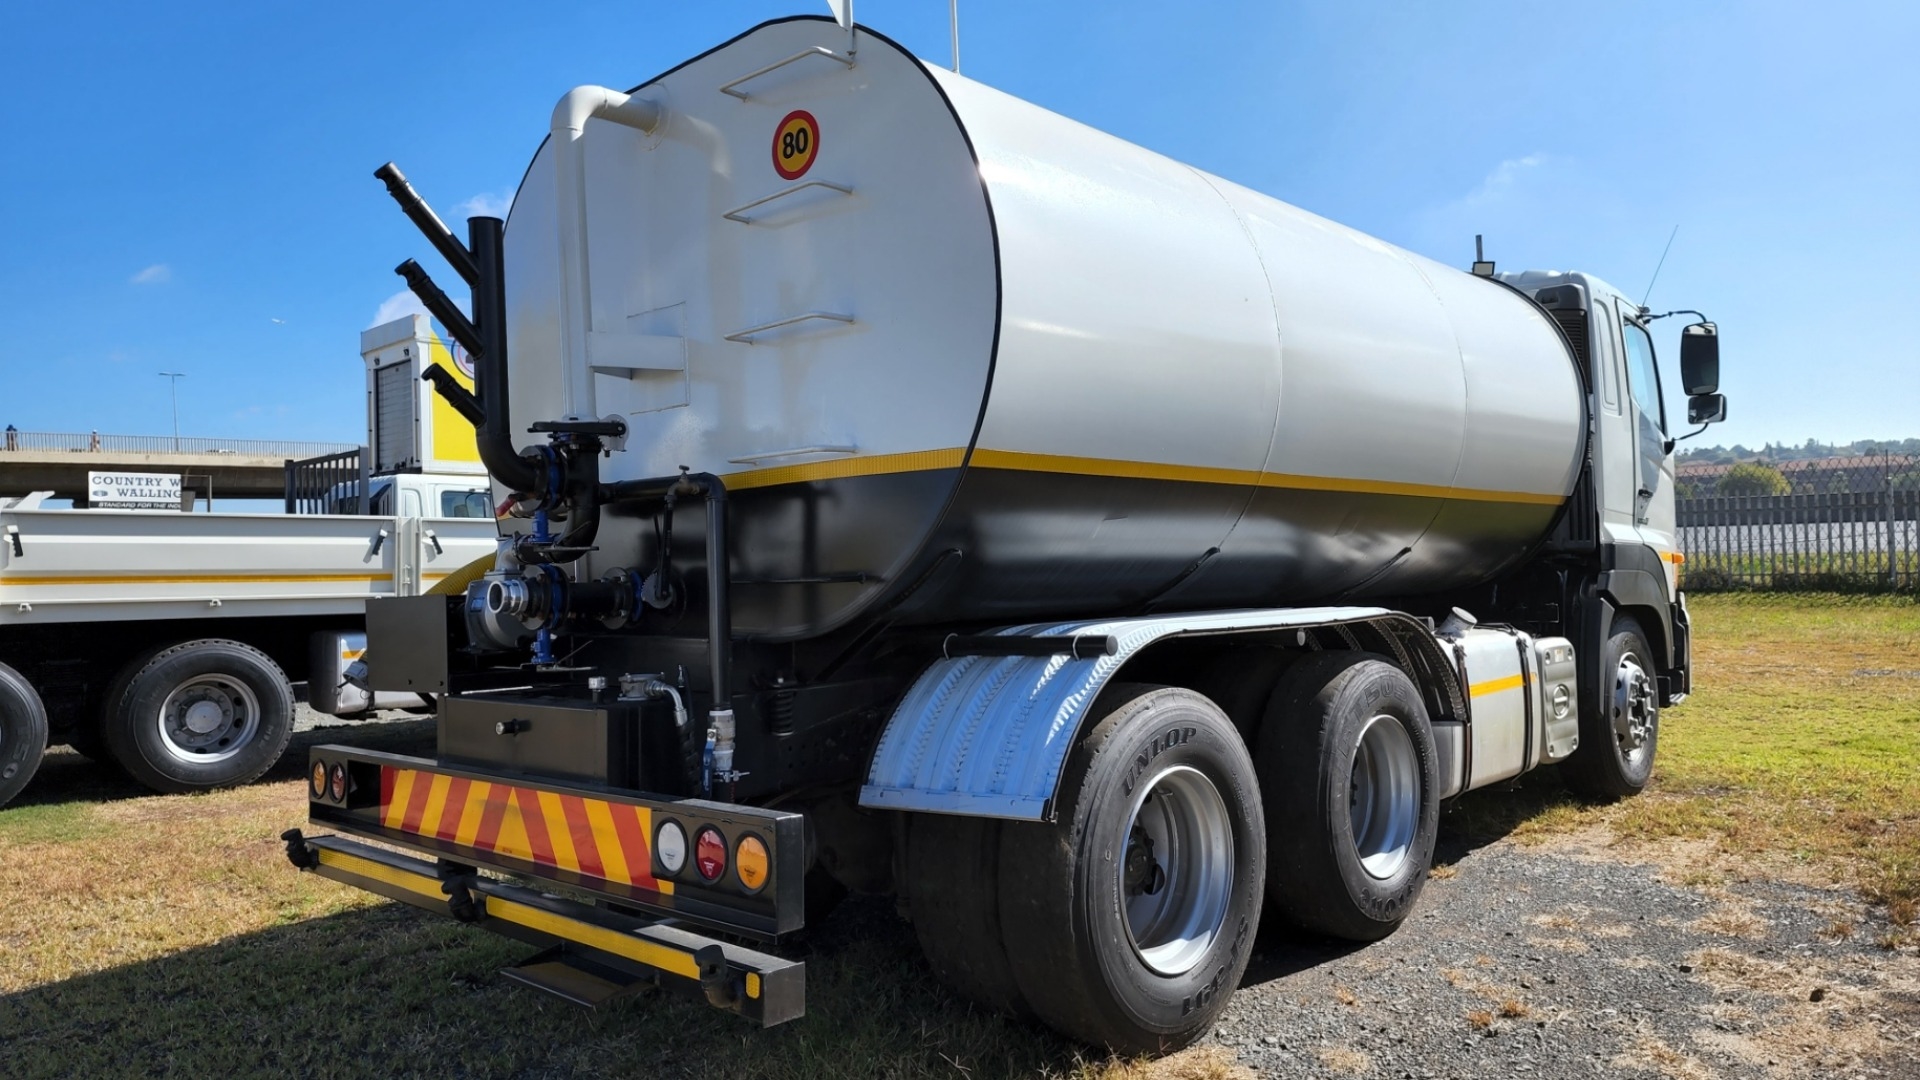 Hino Water bowser trucks 700 2841 16 000Lt Water Tanker 2016 for sale by 4 Ton Trucks | Truck & Trailer Marketplaces